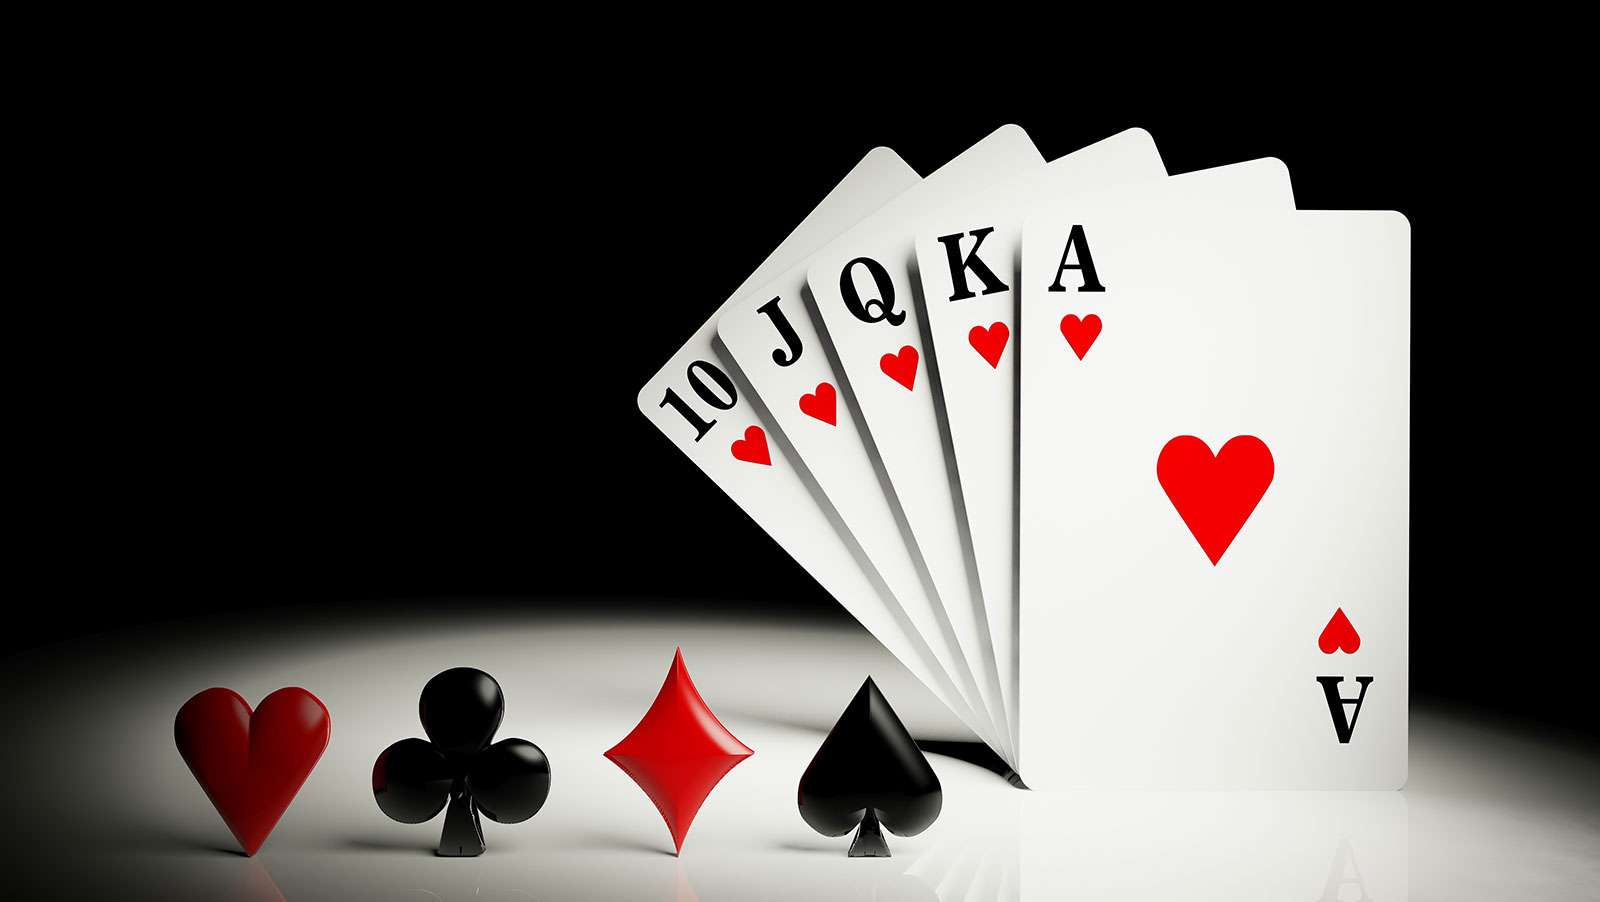 What Is A Royal Flush In Cards